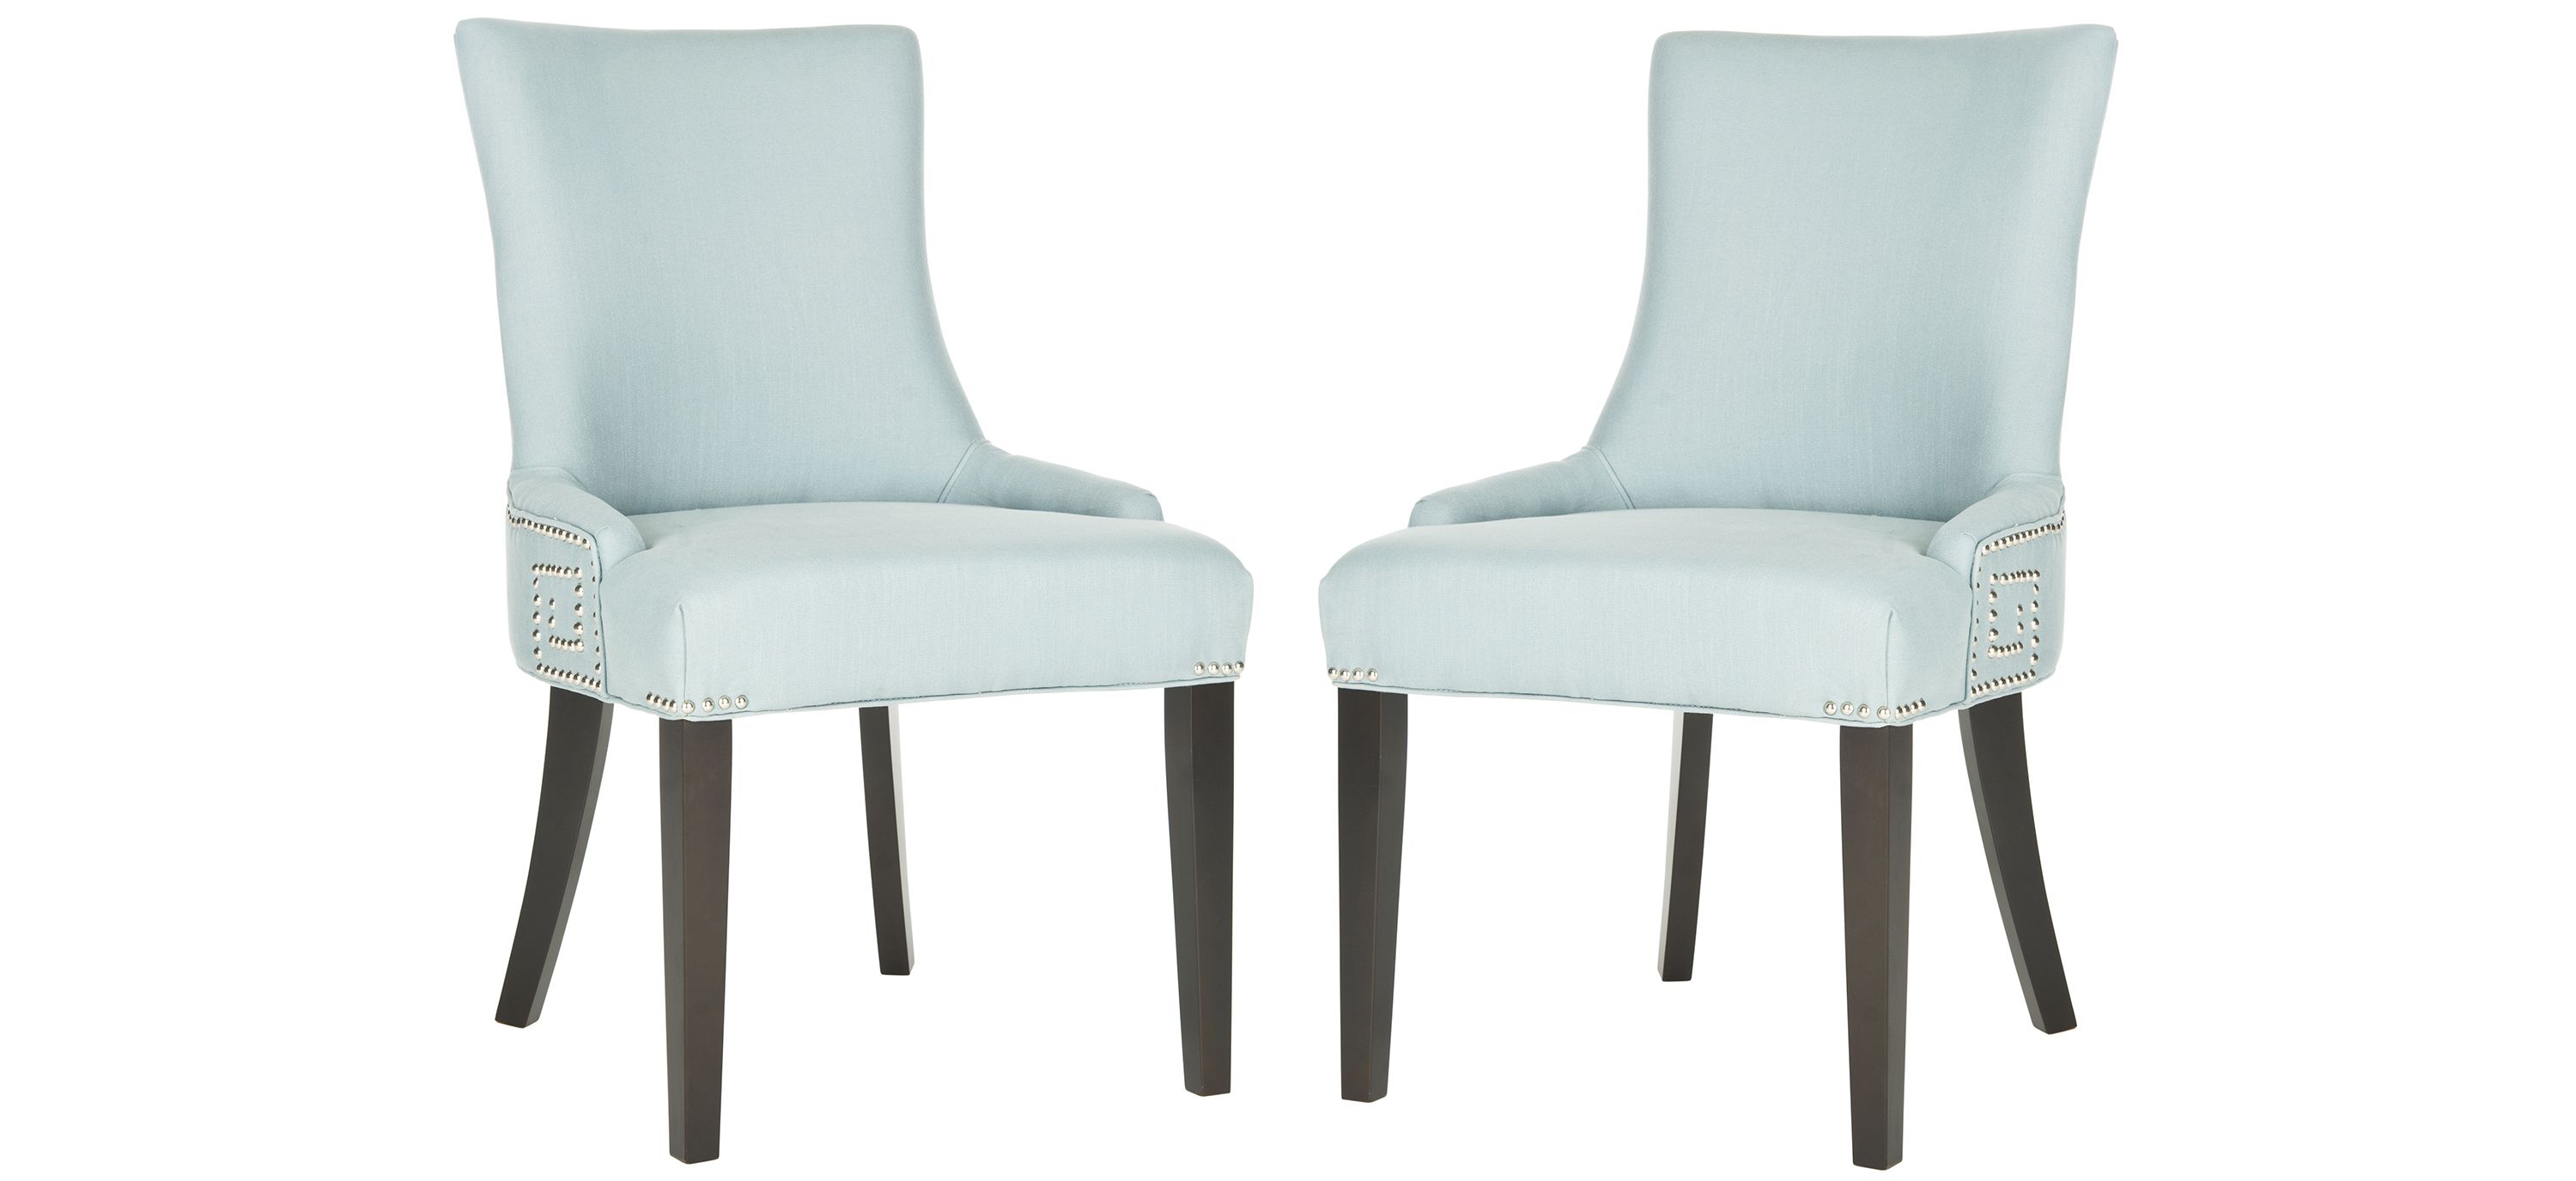 Marcie Dining Chair - Set of 2